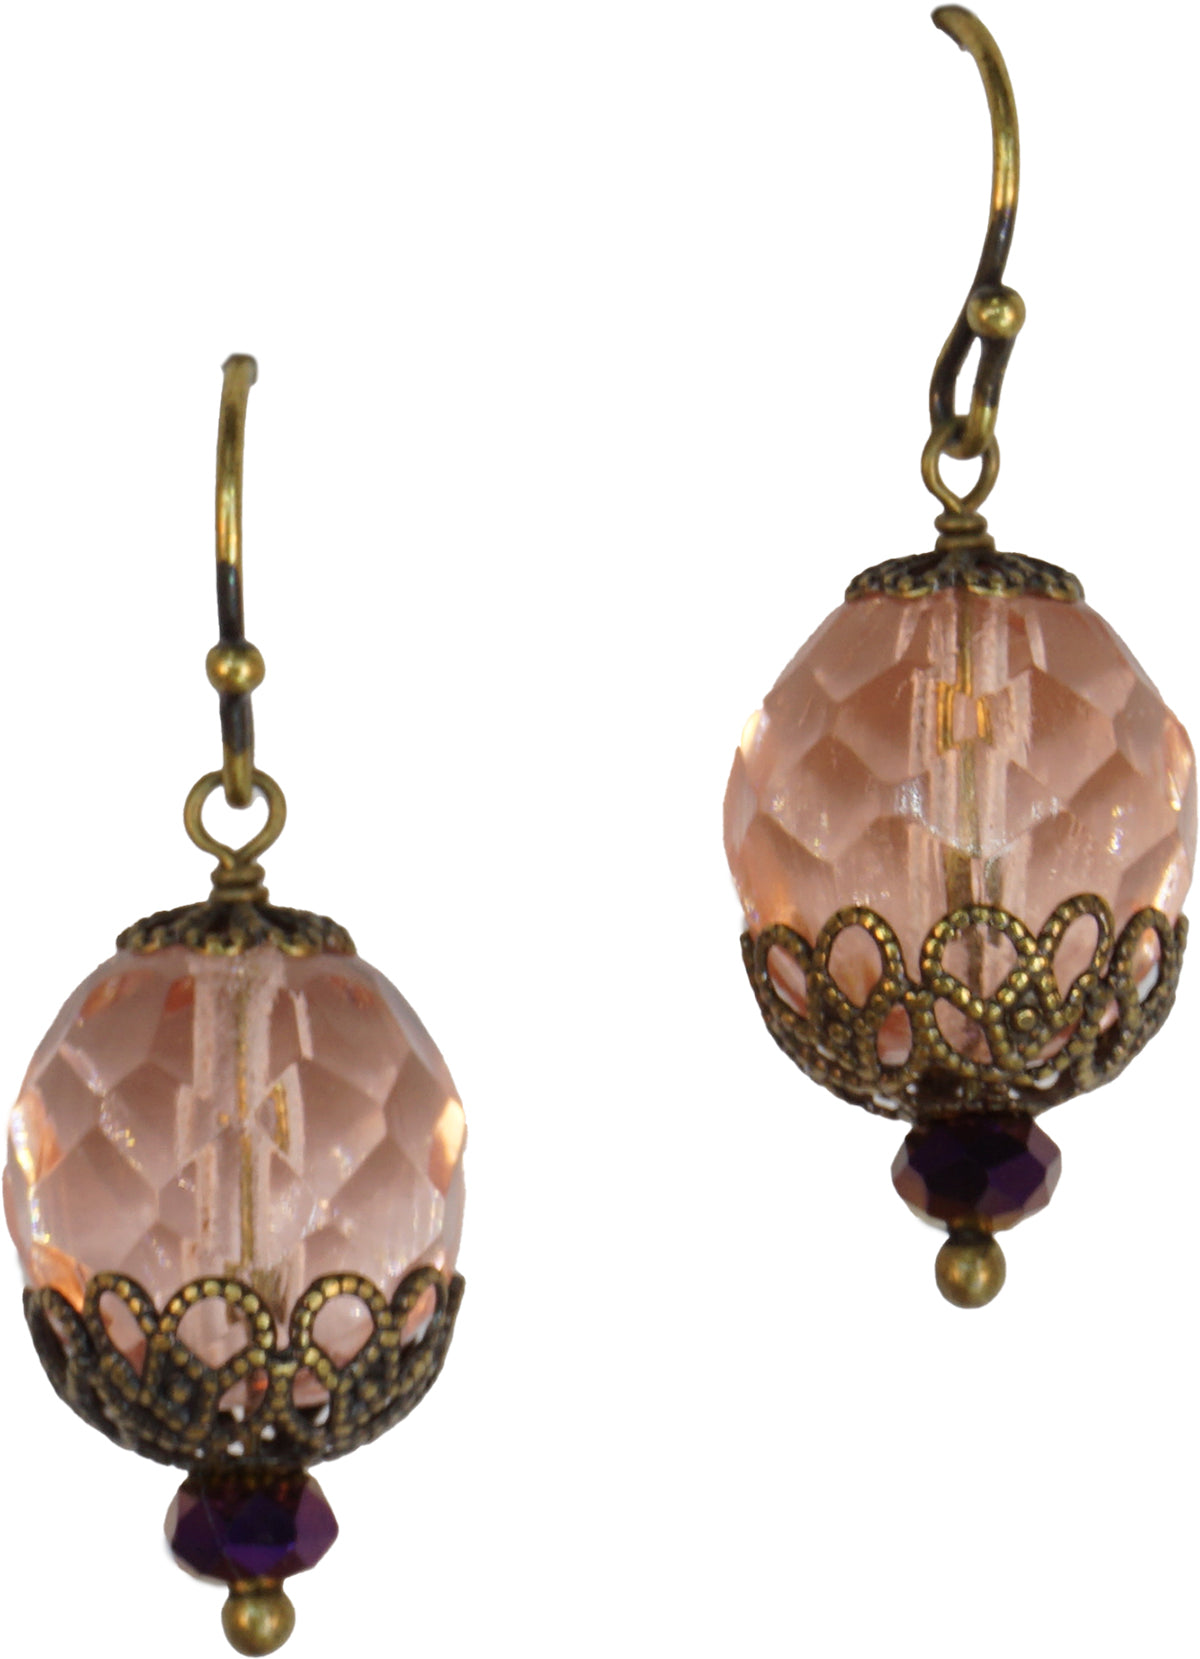 Earrings: Bits of Bliss: Hand-Faceted Rose Czech Glass: Antique Brass Hook (Qty. 1 Pair)